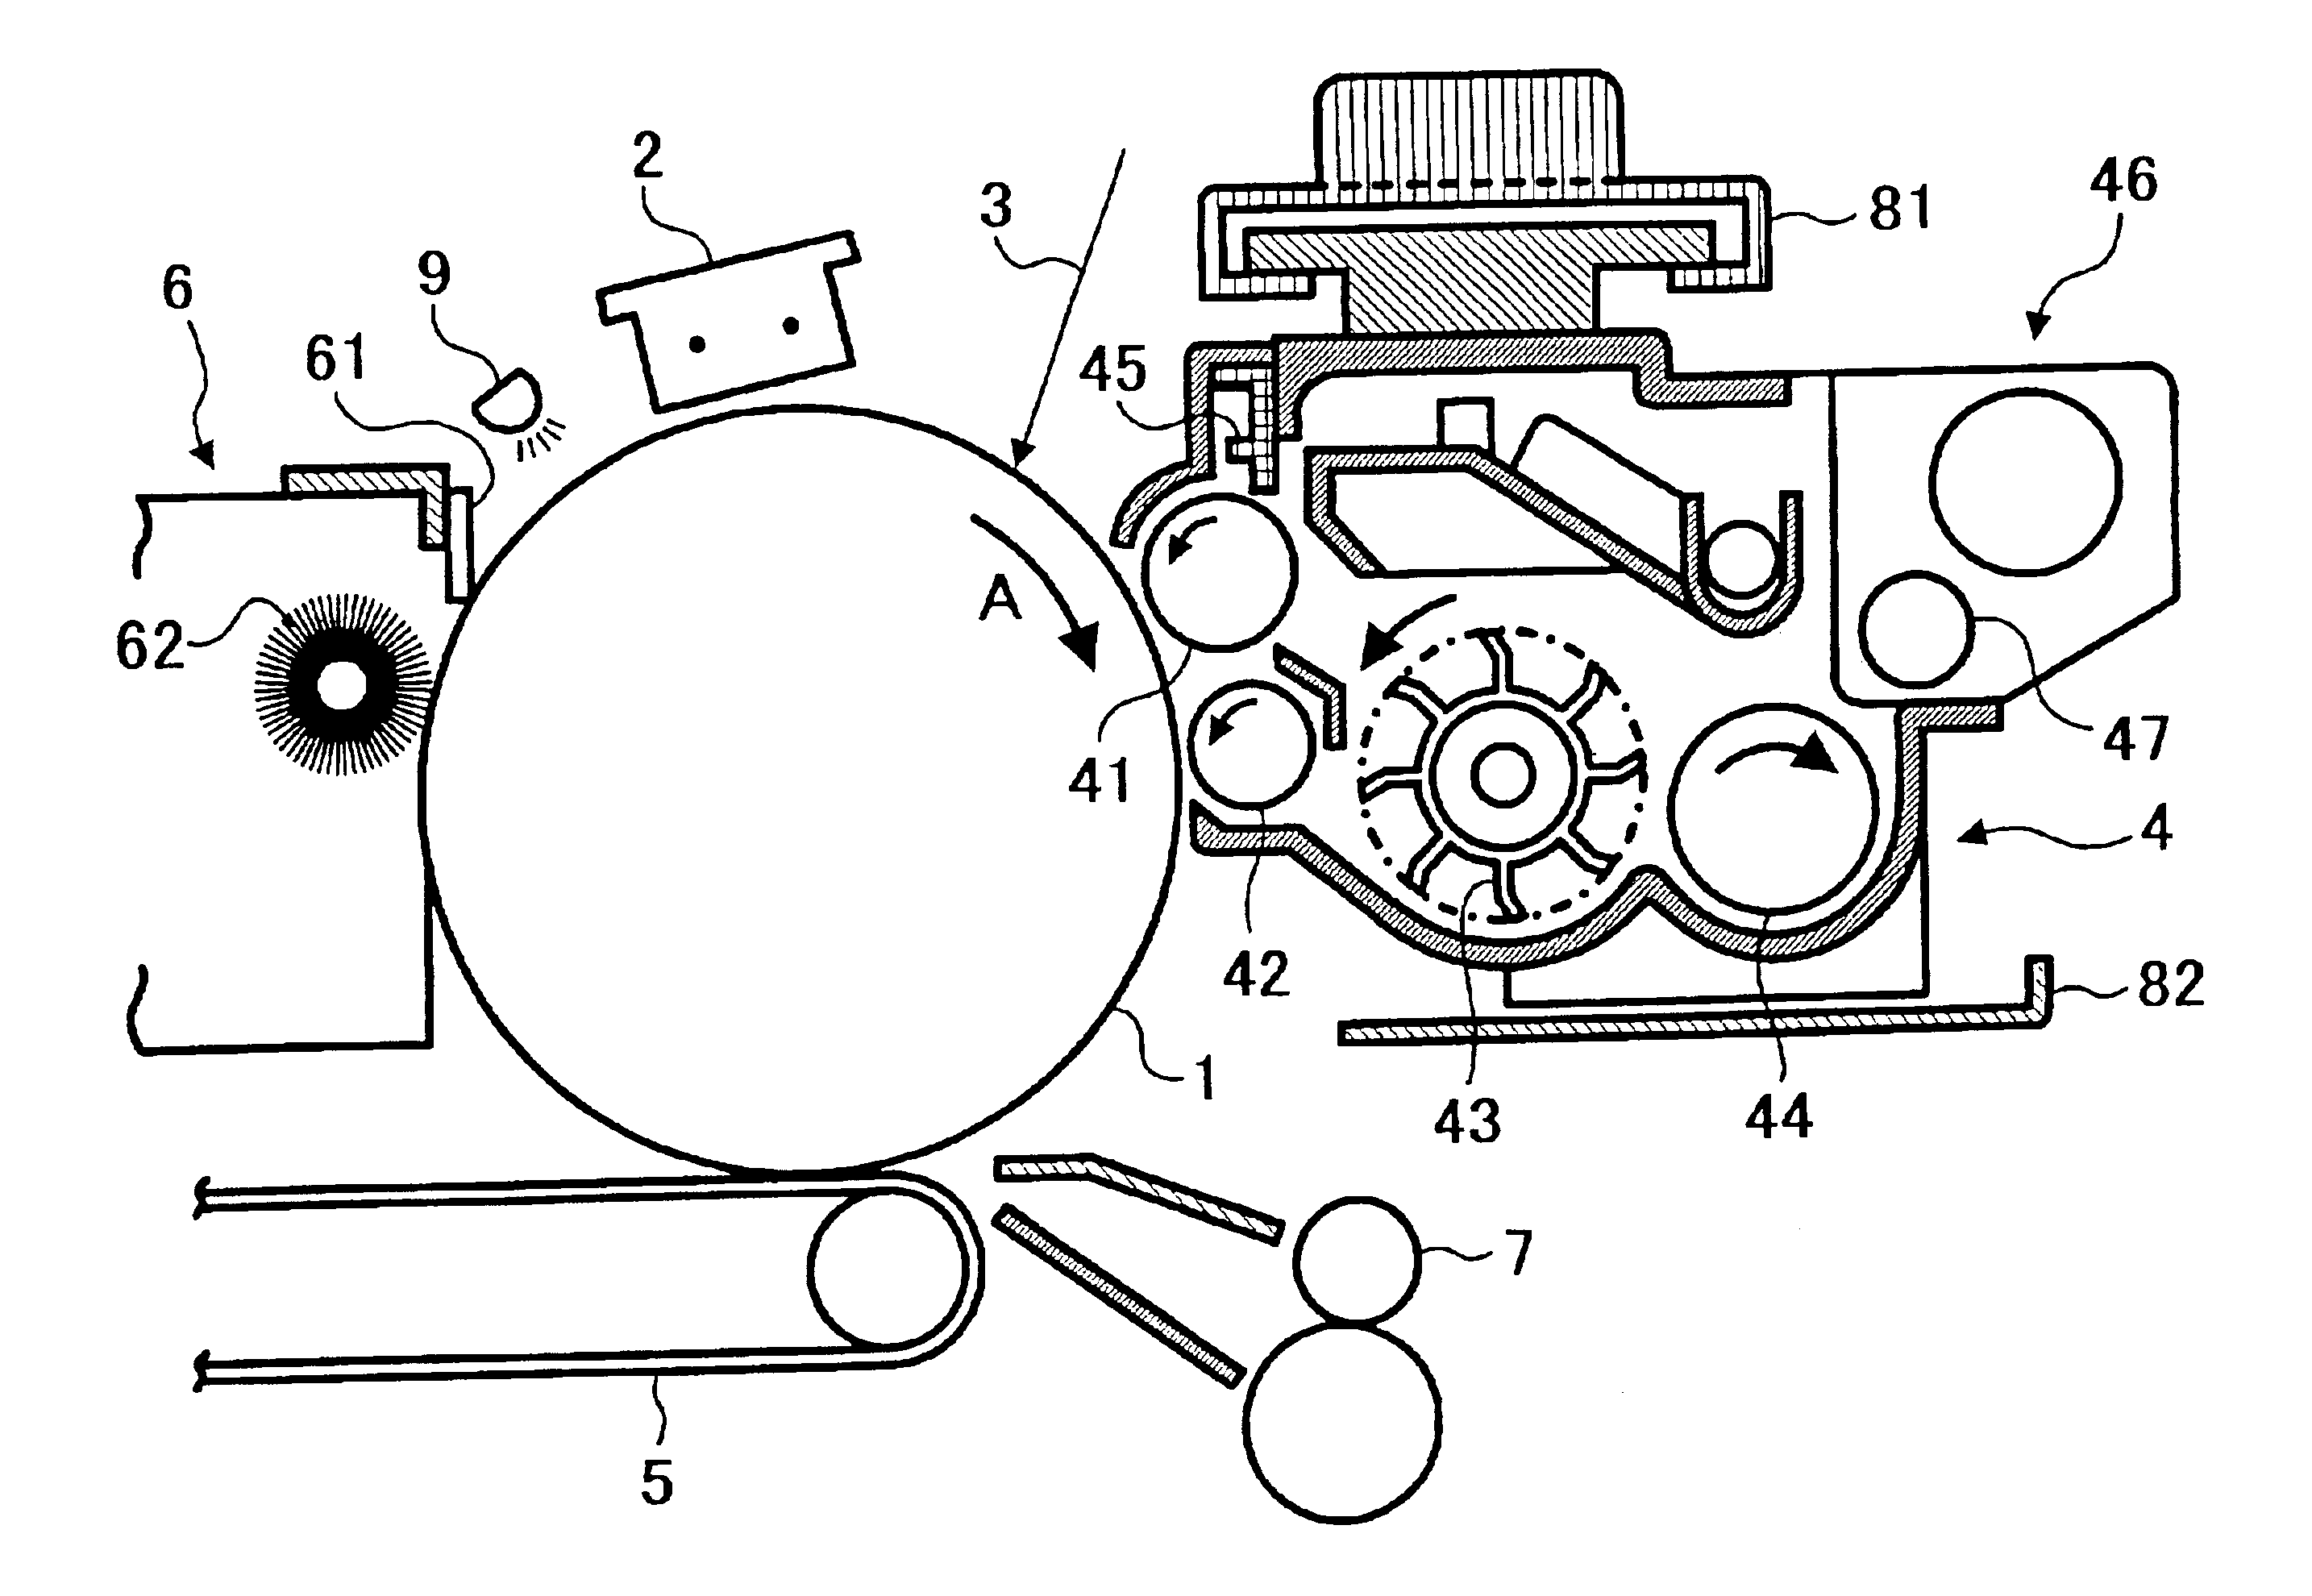 Toner, method of forming the toner, and image forming method and apparatus using the toner